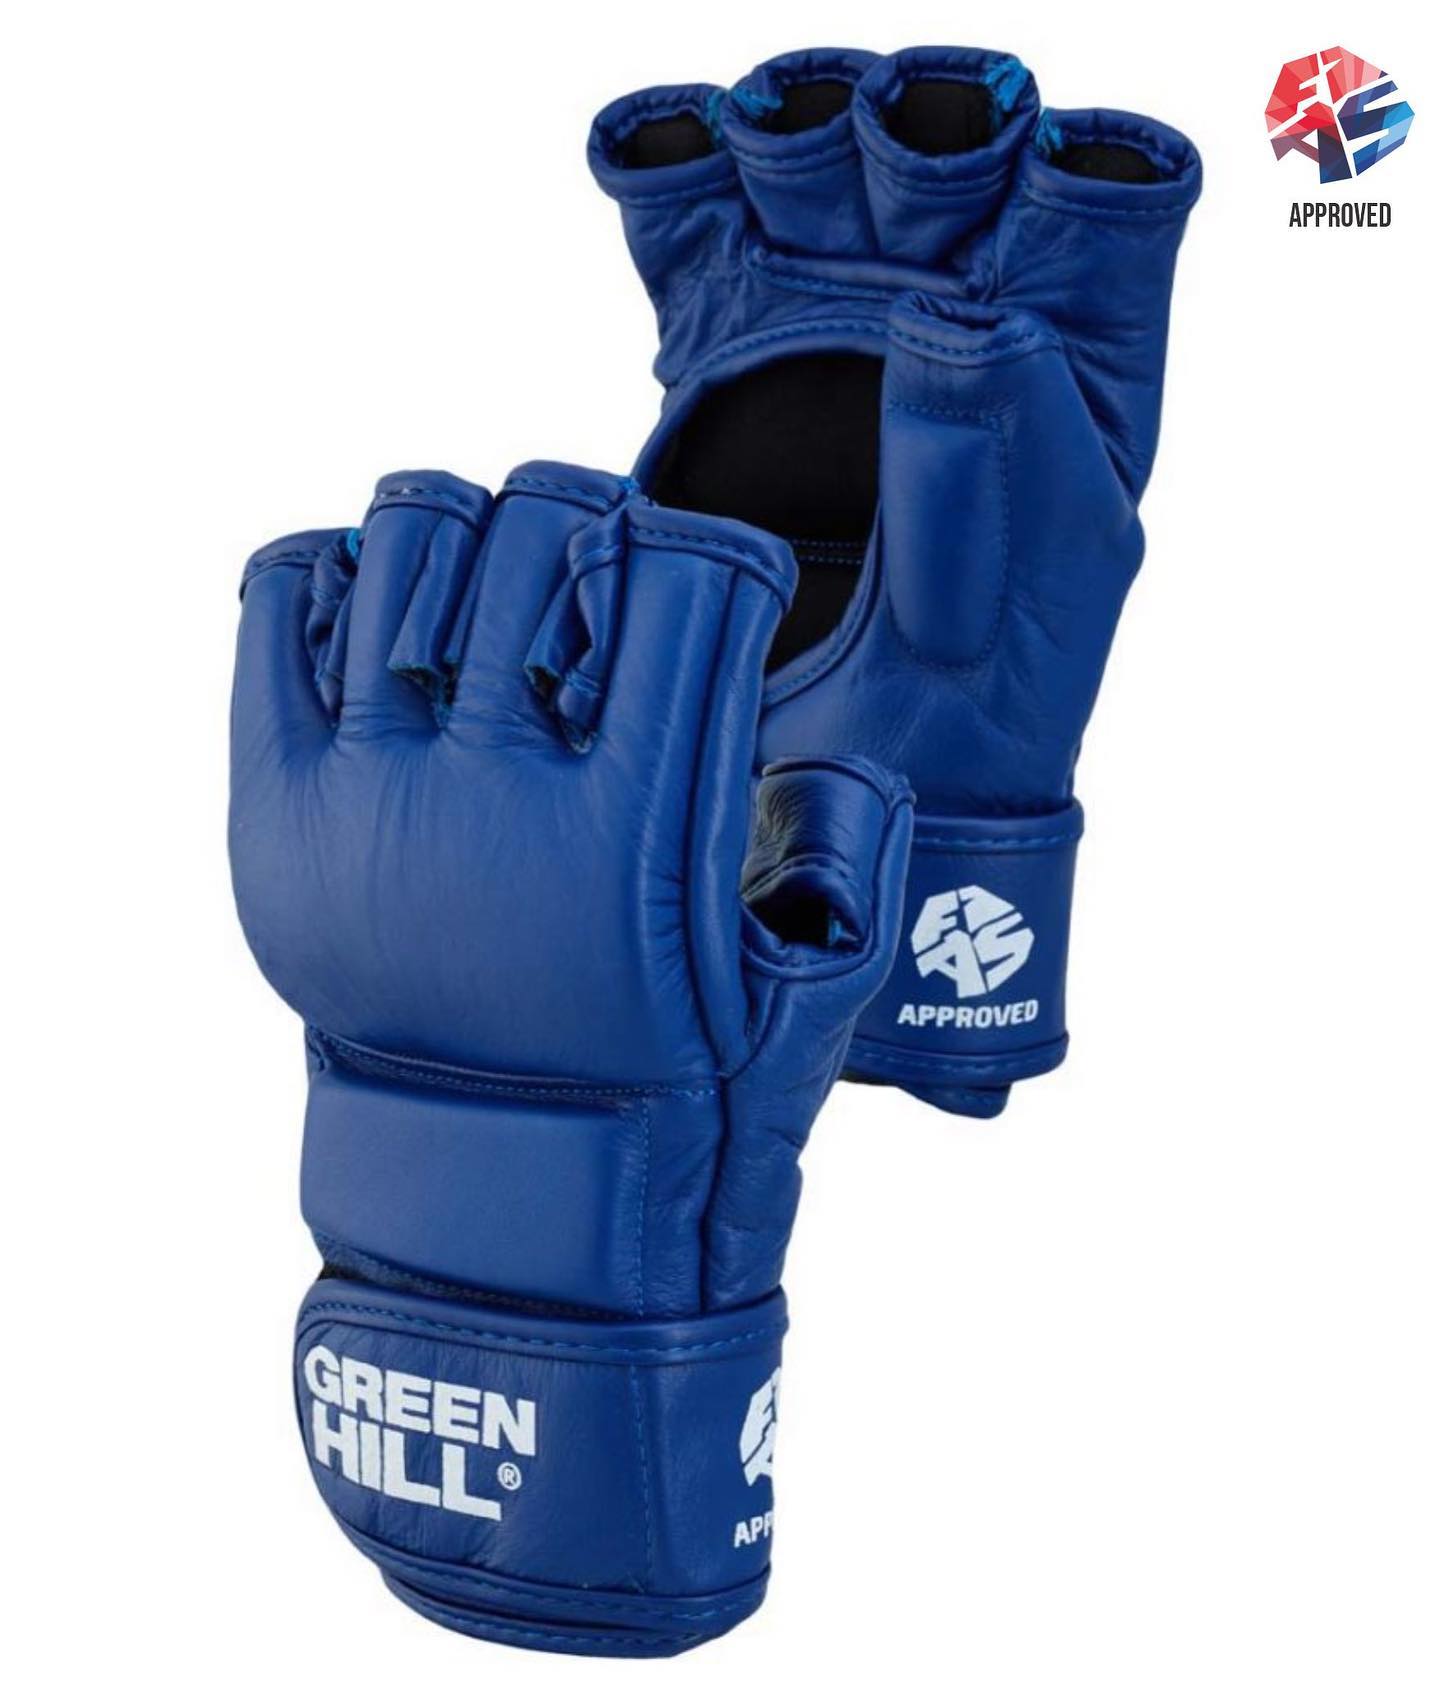 SAMBO GLOVES FIAS APPROVED